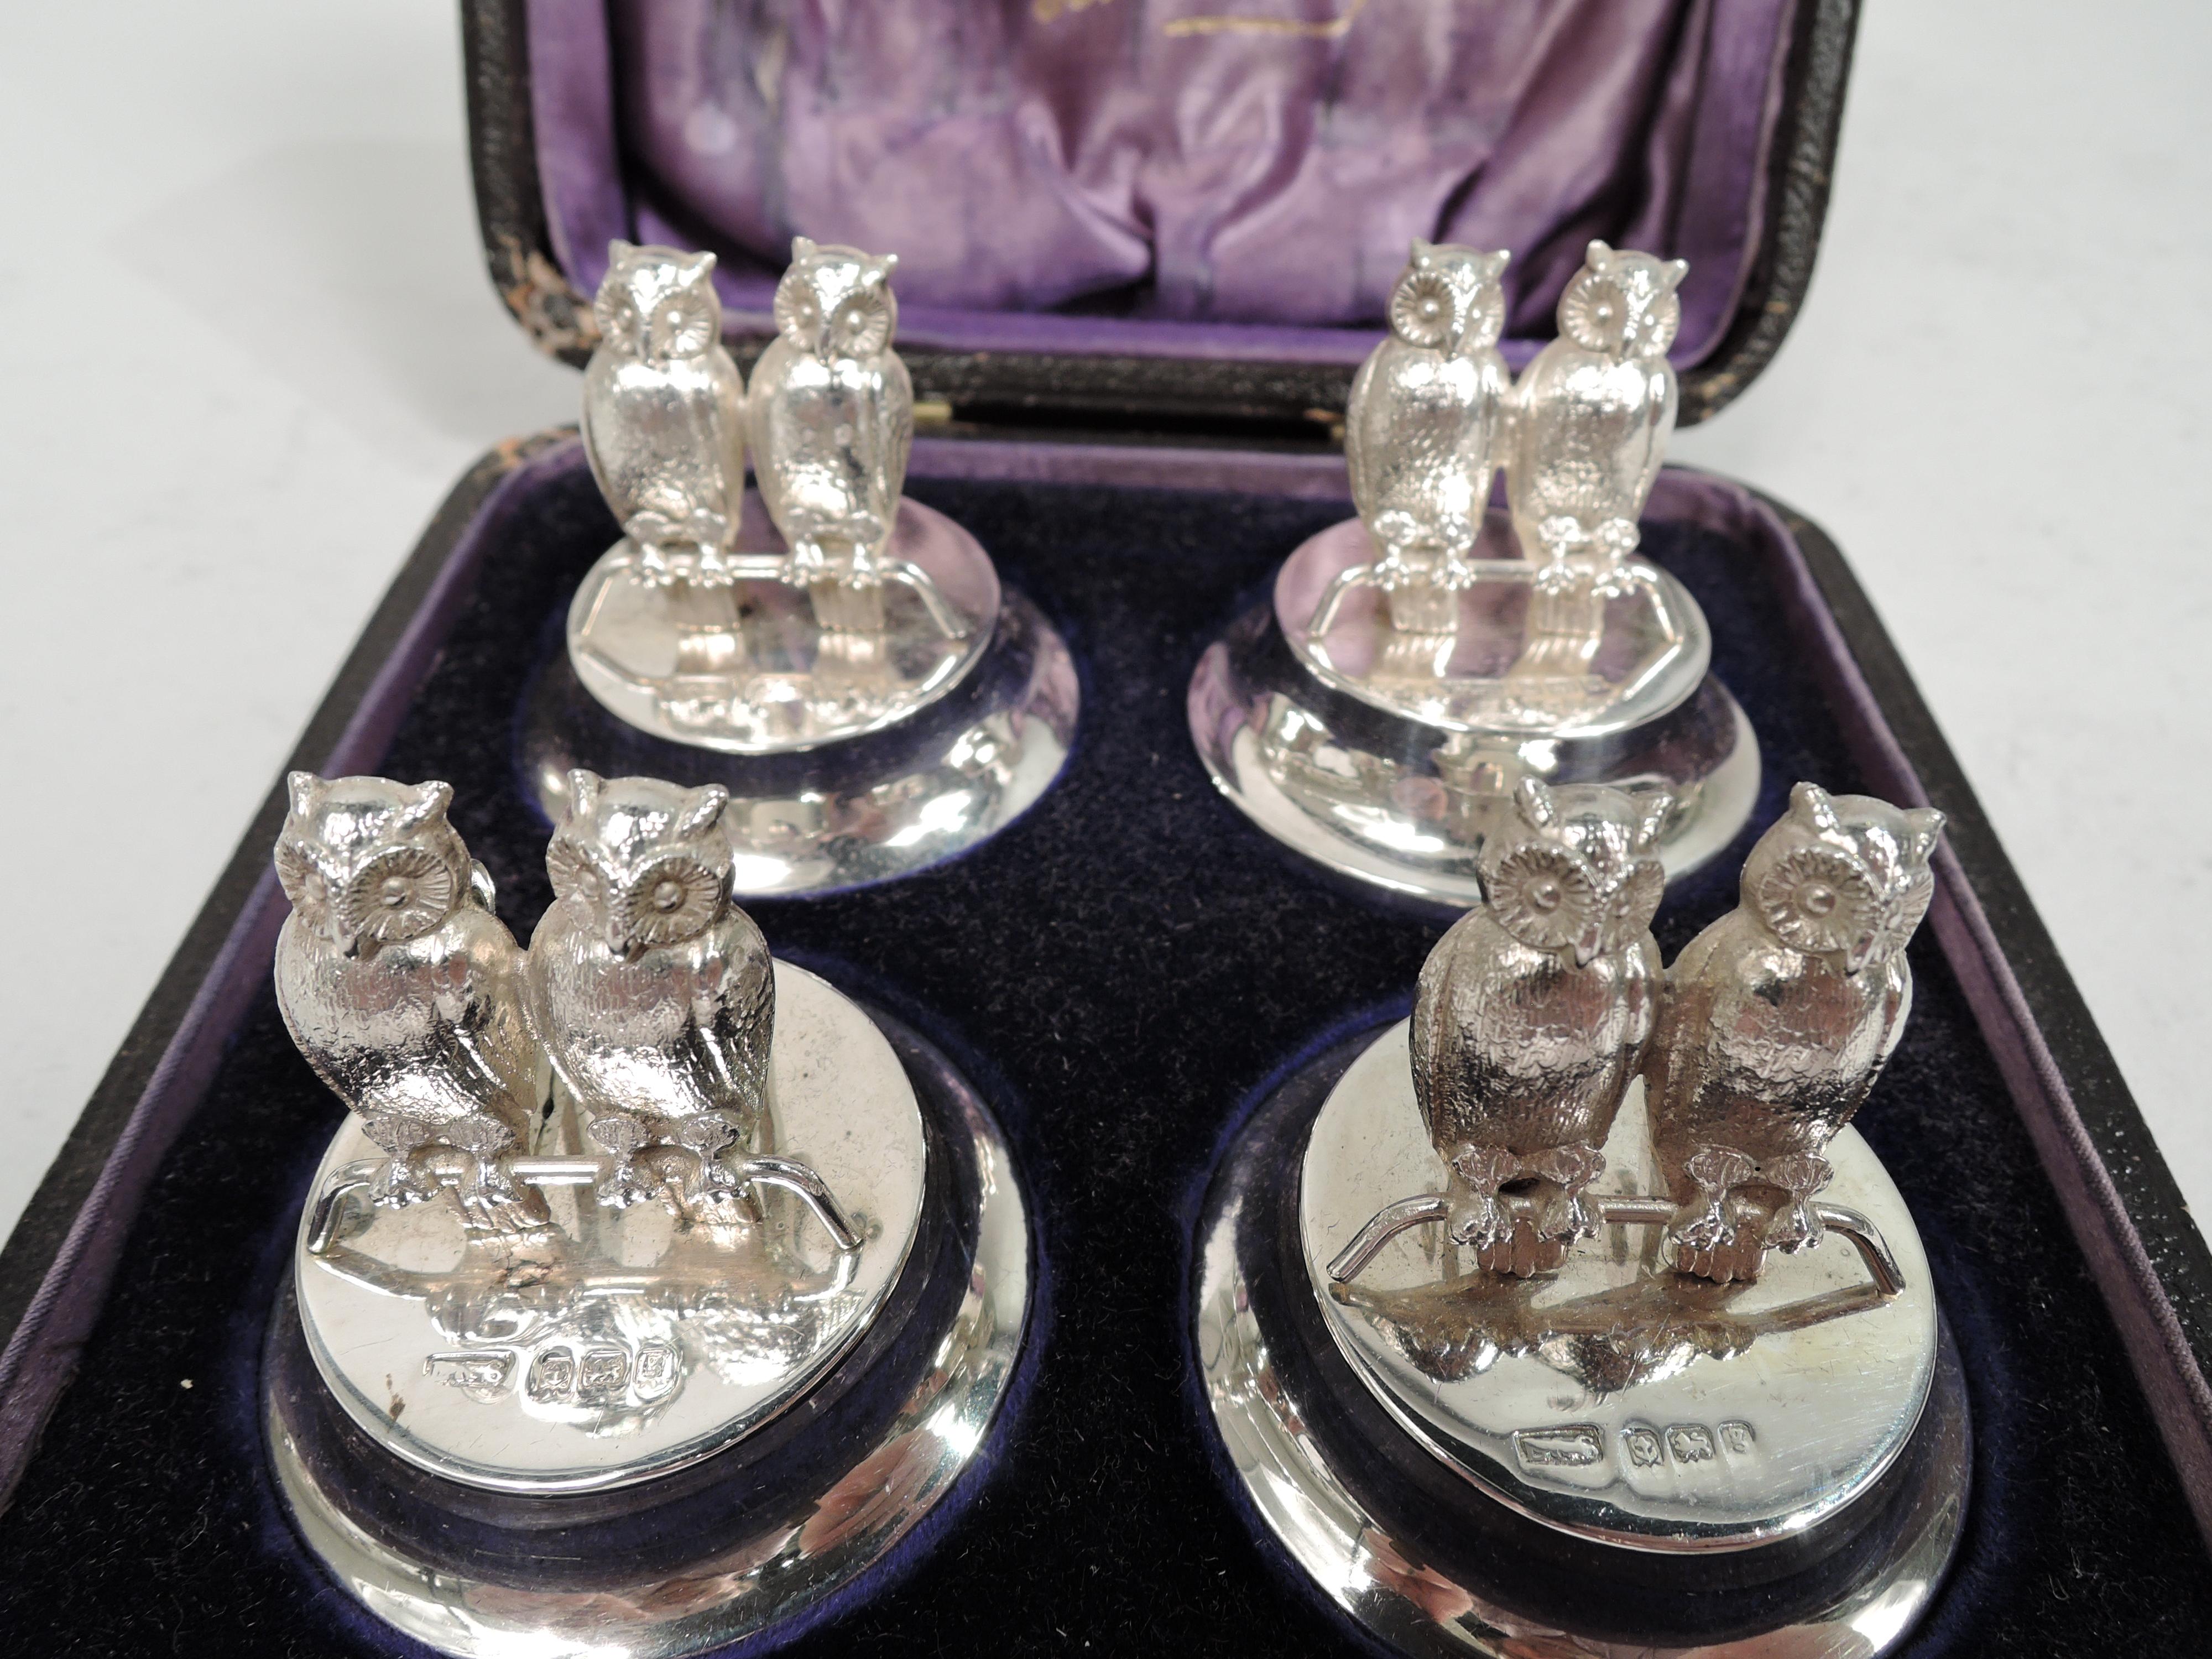 Set of 4 Edwardian sterling silver figural place card holders. Made by Levi & Salaman in Birmingham 1906. Each: Pair of perched owls with scrolled back clip on raised and round base. Wise birds standing ready to tamp down excessive dinner party